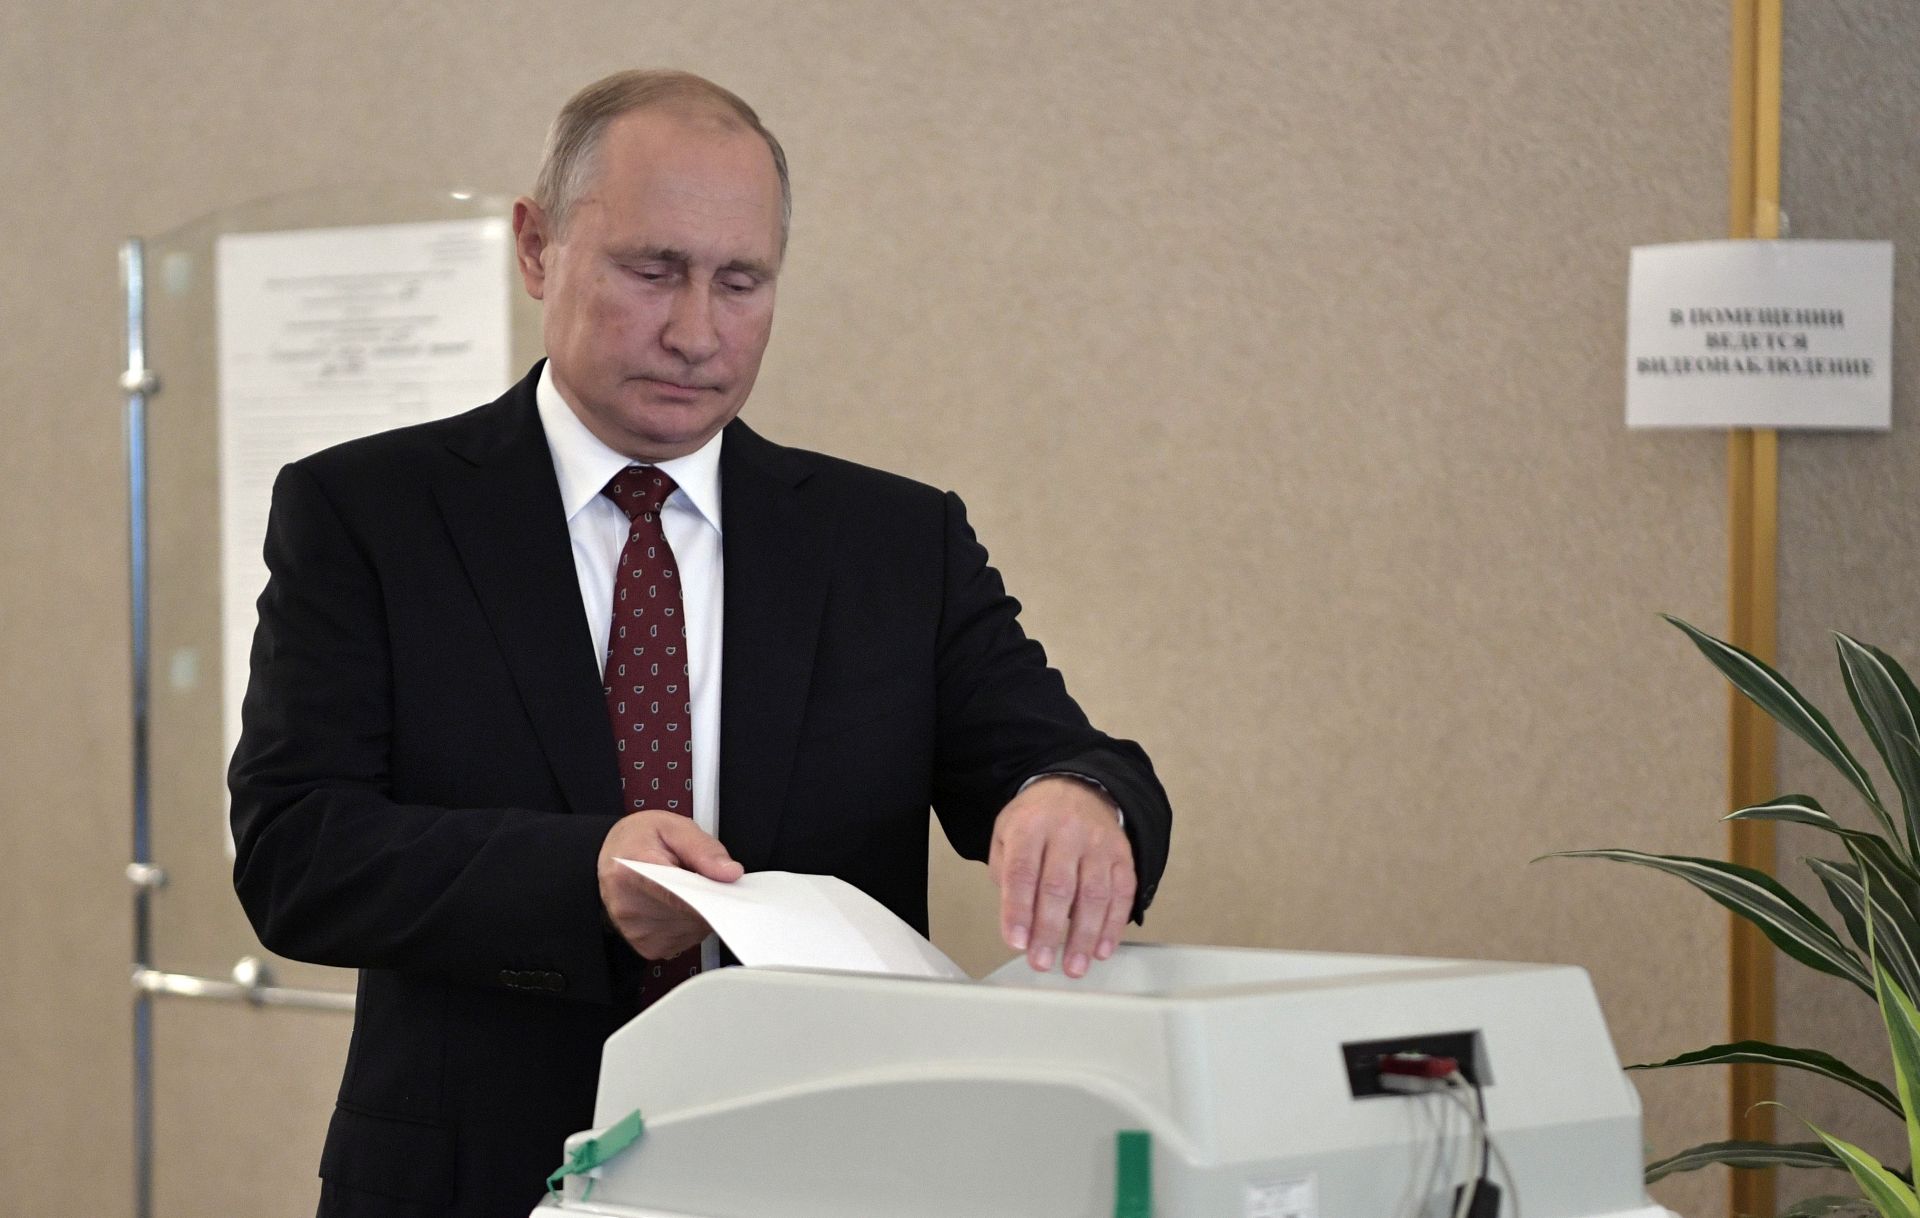 epa07827339 Russian President Vladimir Putin casts his vote at a polling station during Moscow city Duma elections in Moscow, Russia, 08 September 2019. Russians go to polling stations to vote in various regional and municipal elections.  EPA/ALEXEY NIKOLSKY/ SPUTNIK / KREMLIN POOL